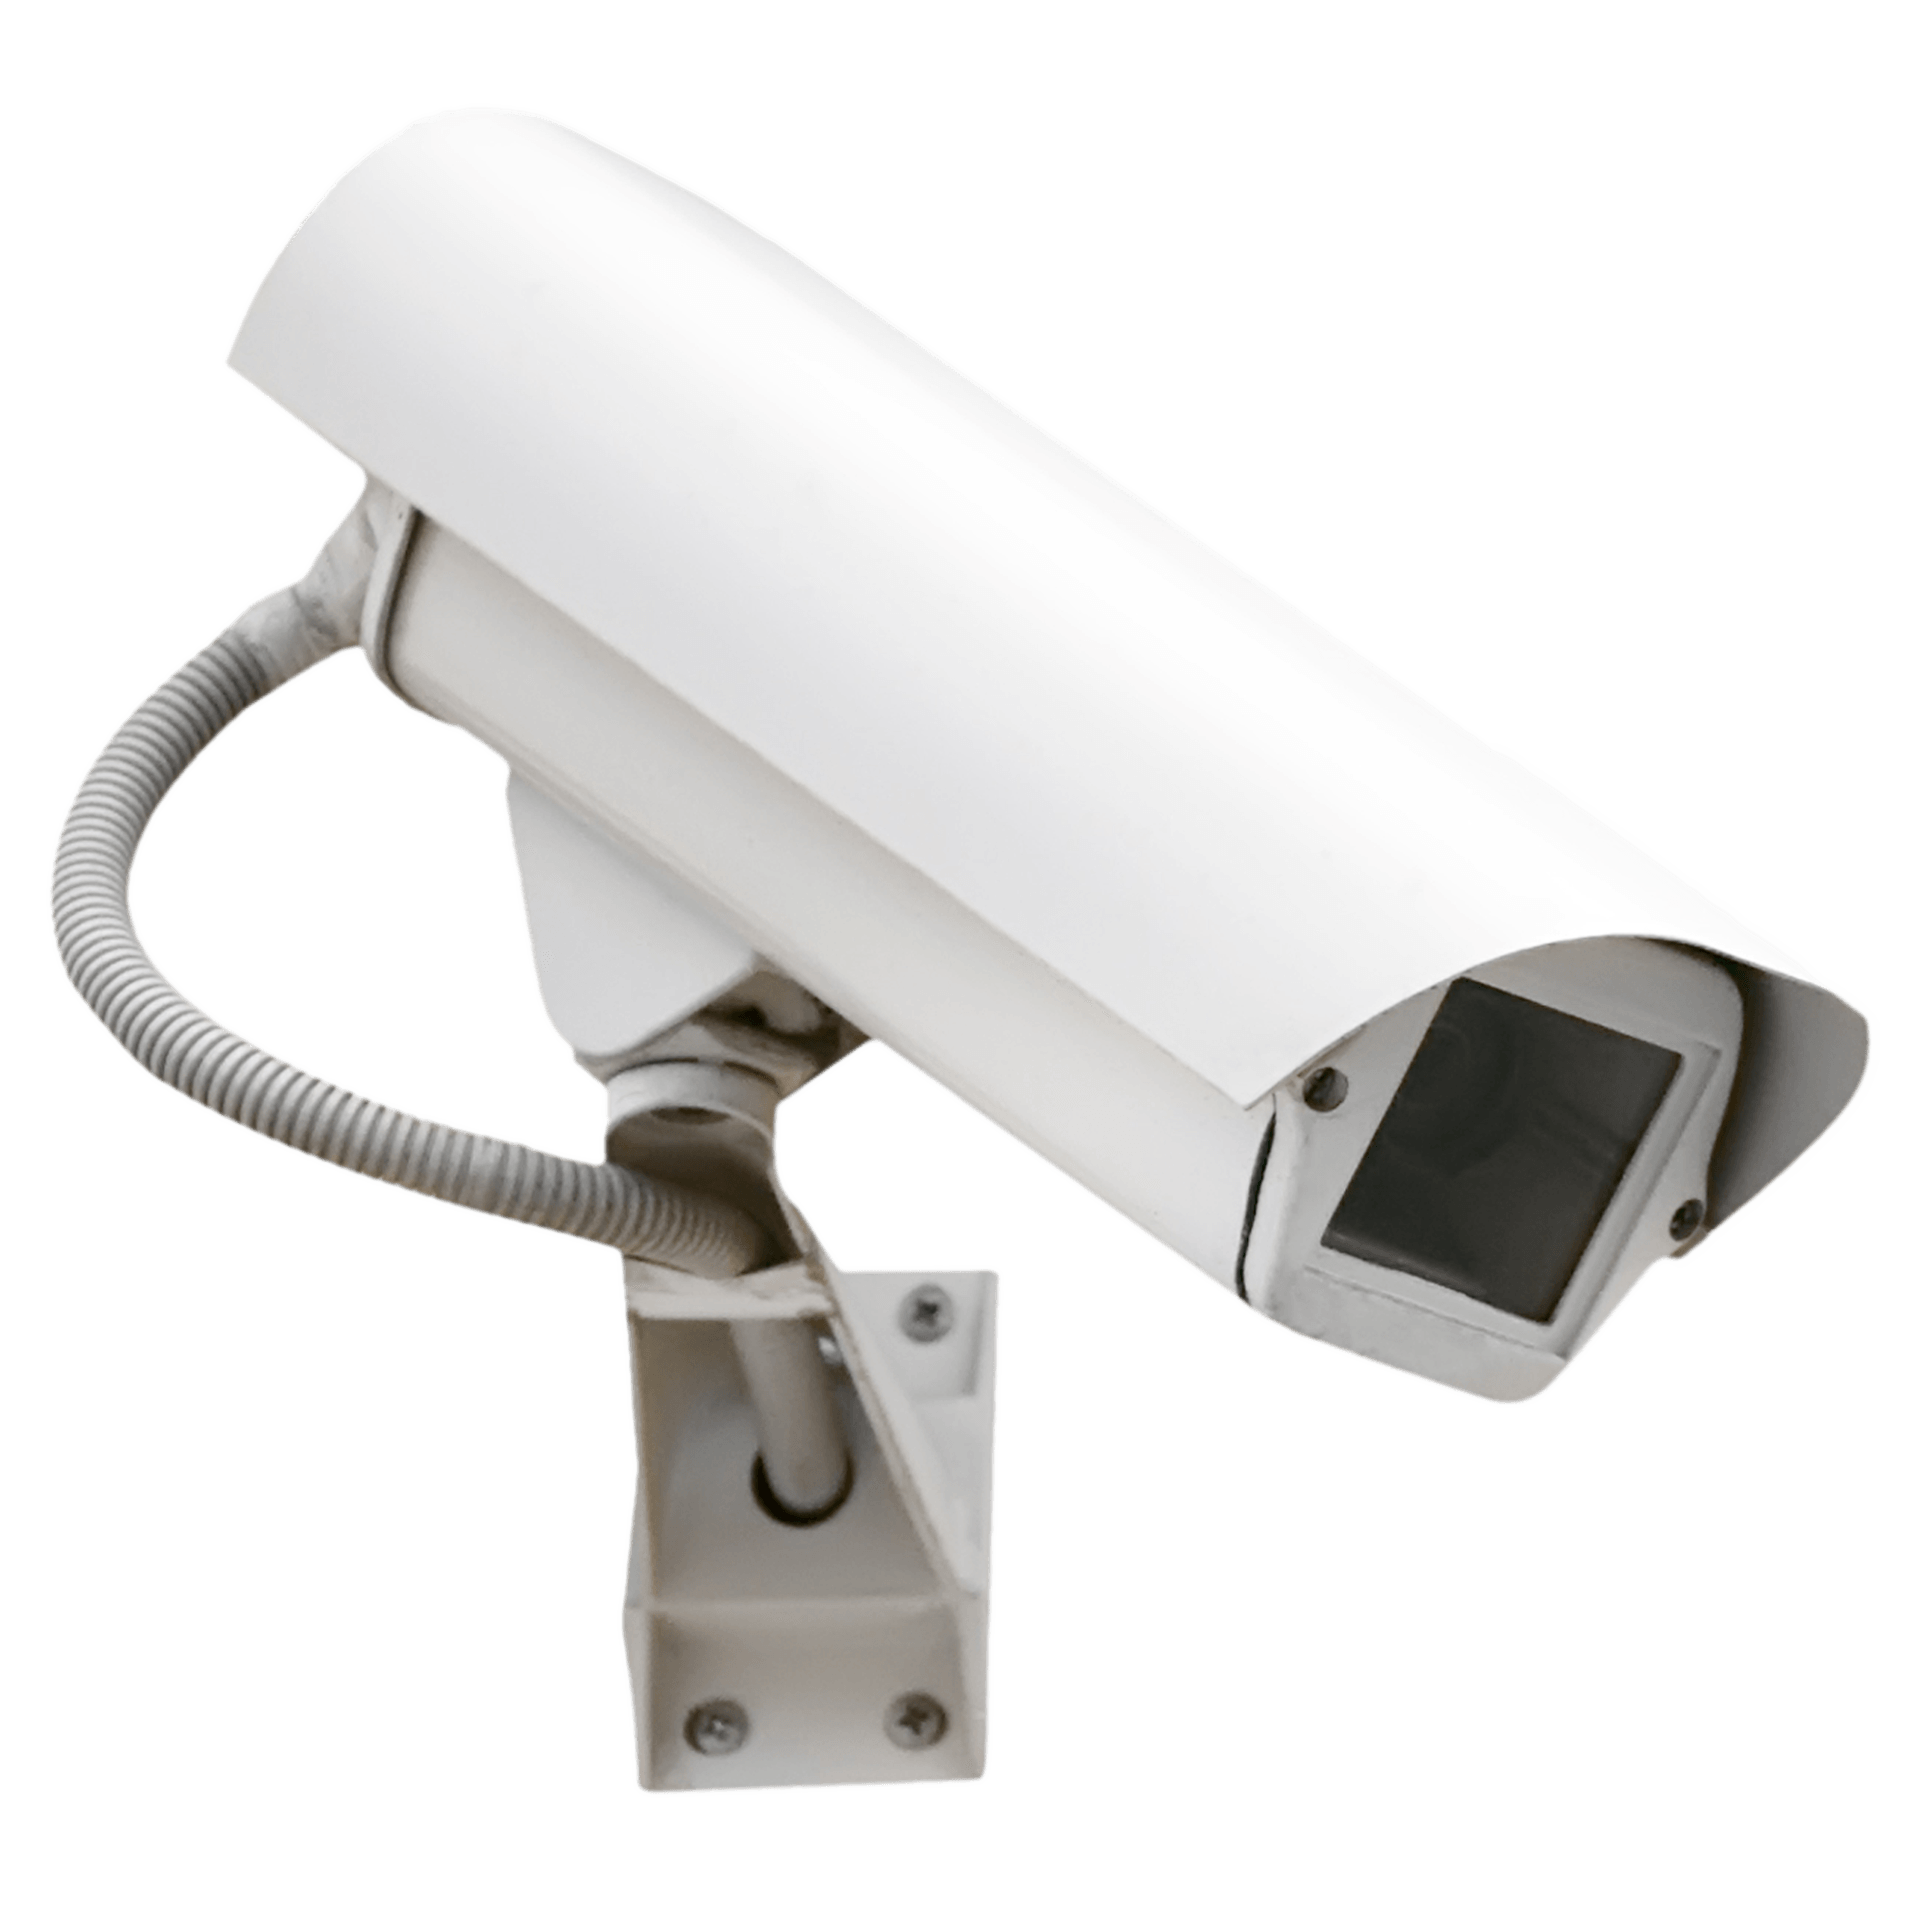 security camera isolated on white